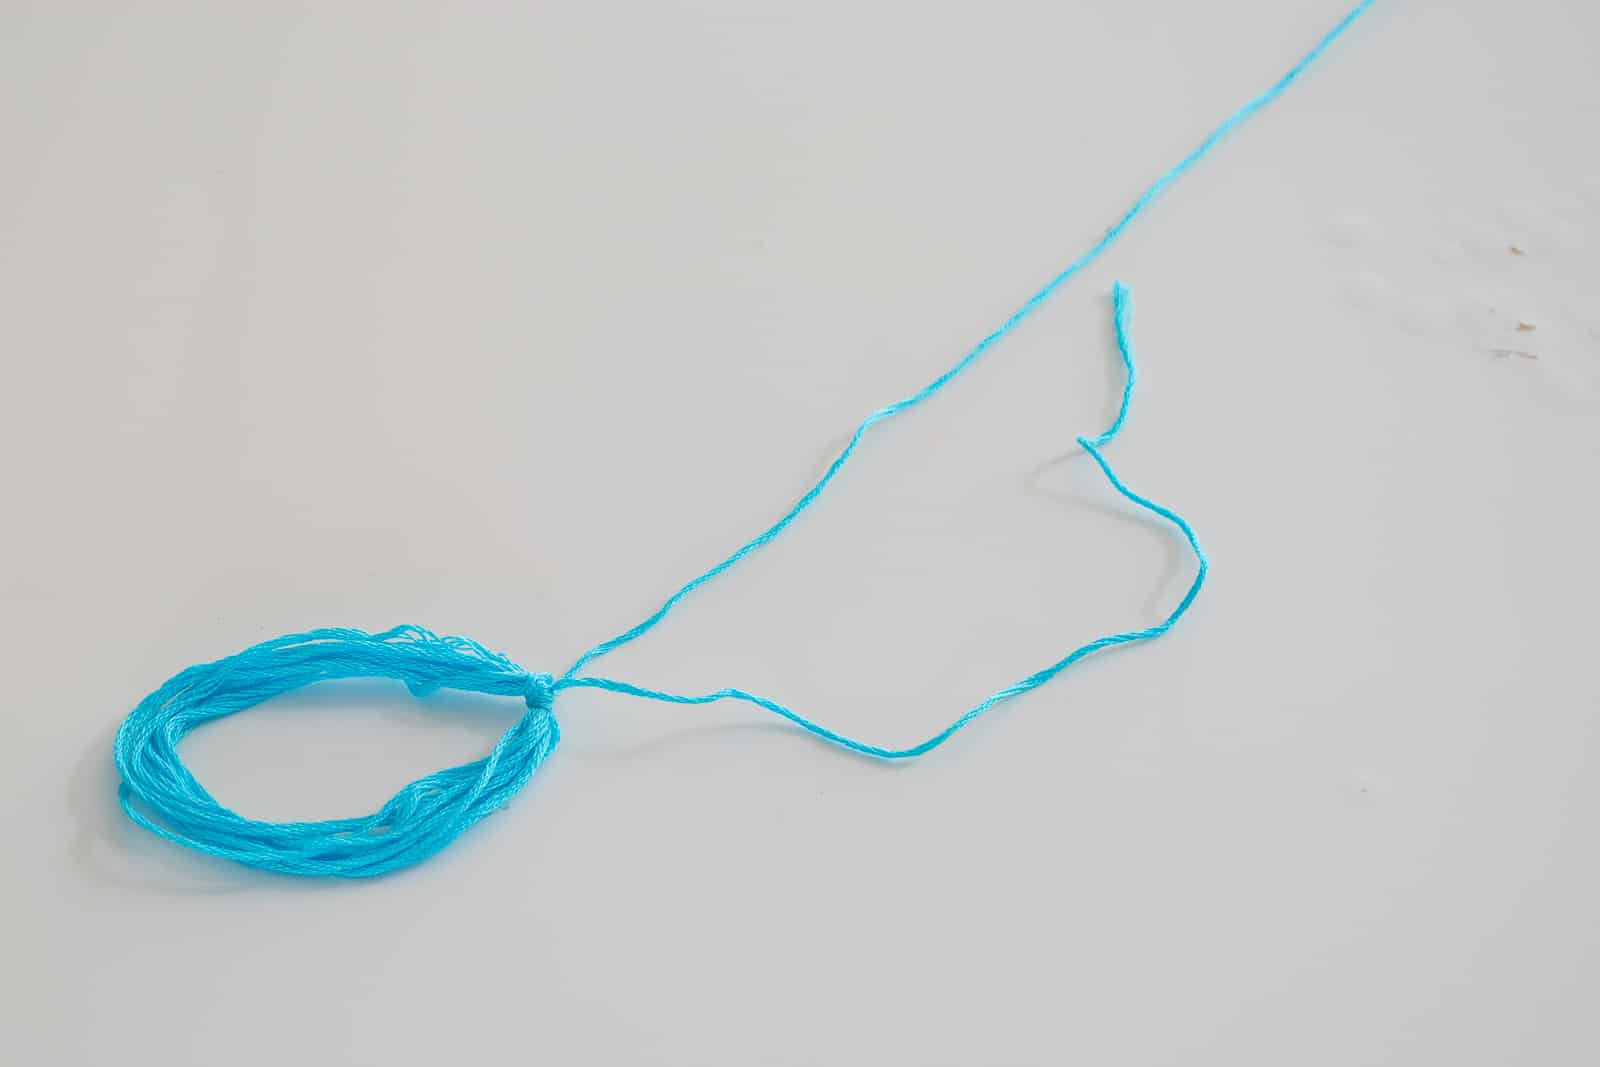 create a hanging loop from thread